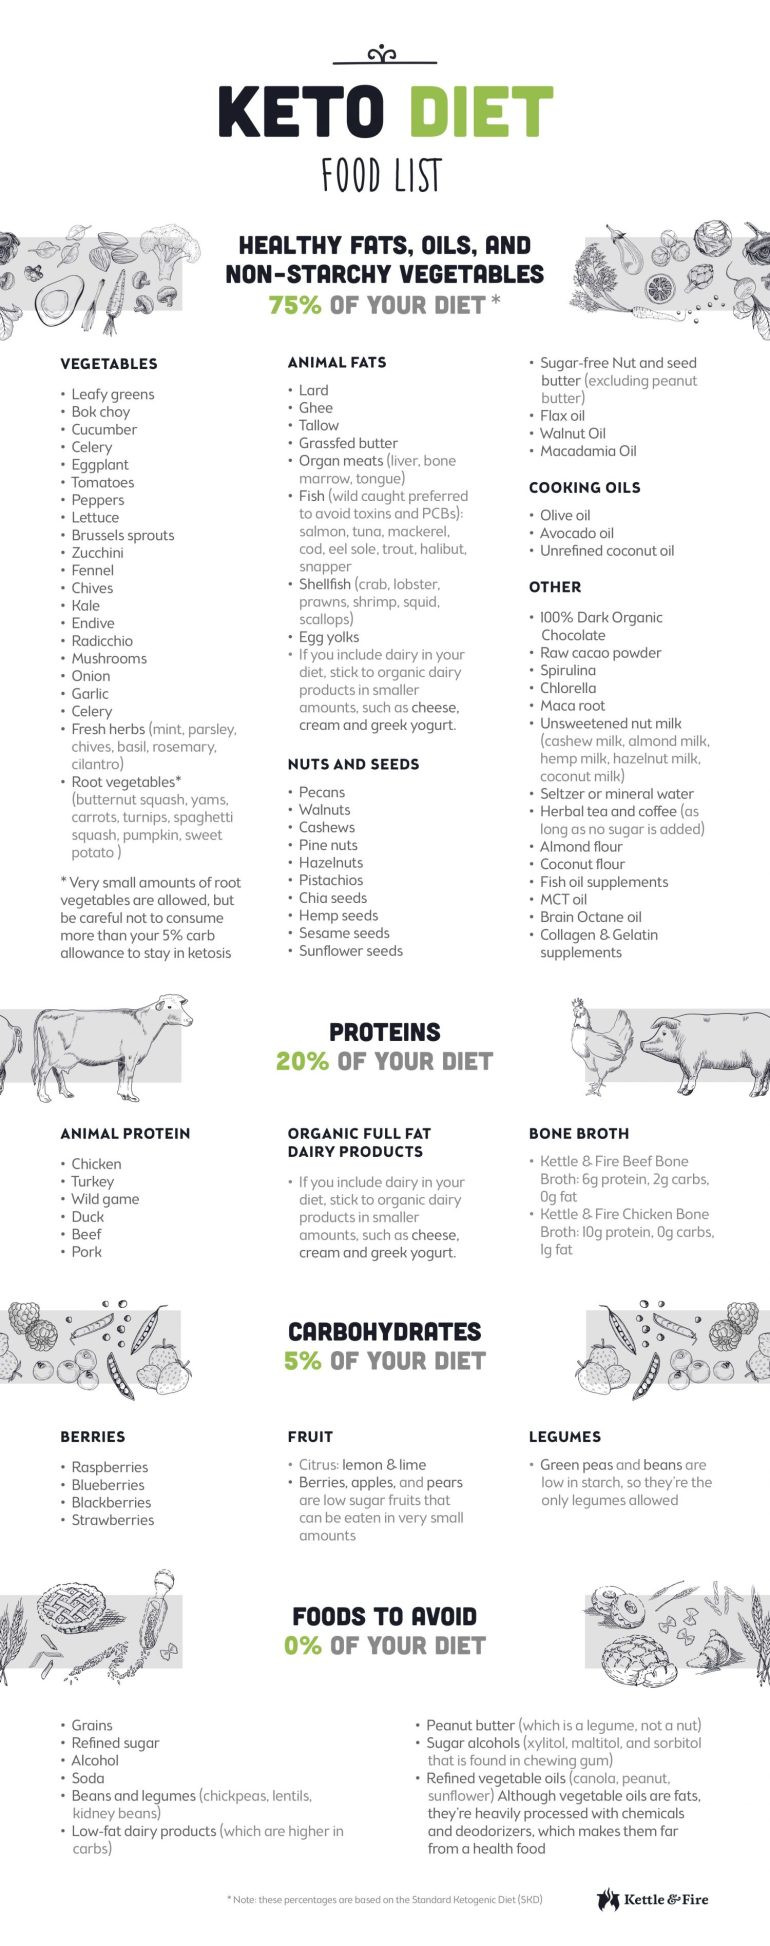 Keto Diet For Beginners Meal Plan Easy With Grocery List
 The Ultimate Keto Diet Beginner s Guide & Grocery List